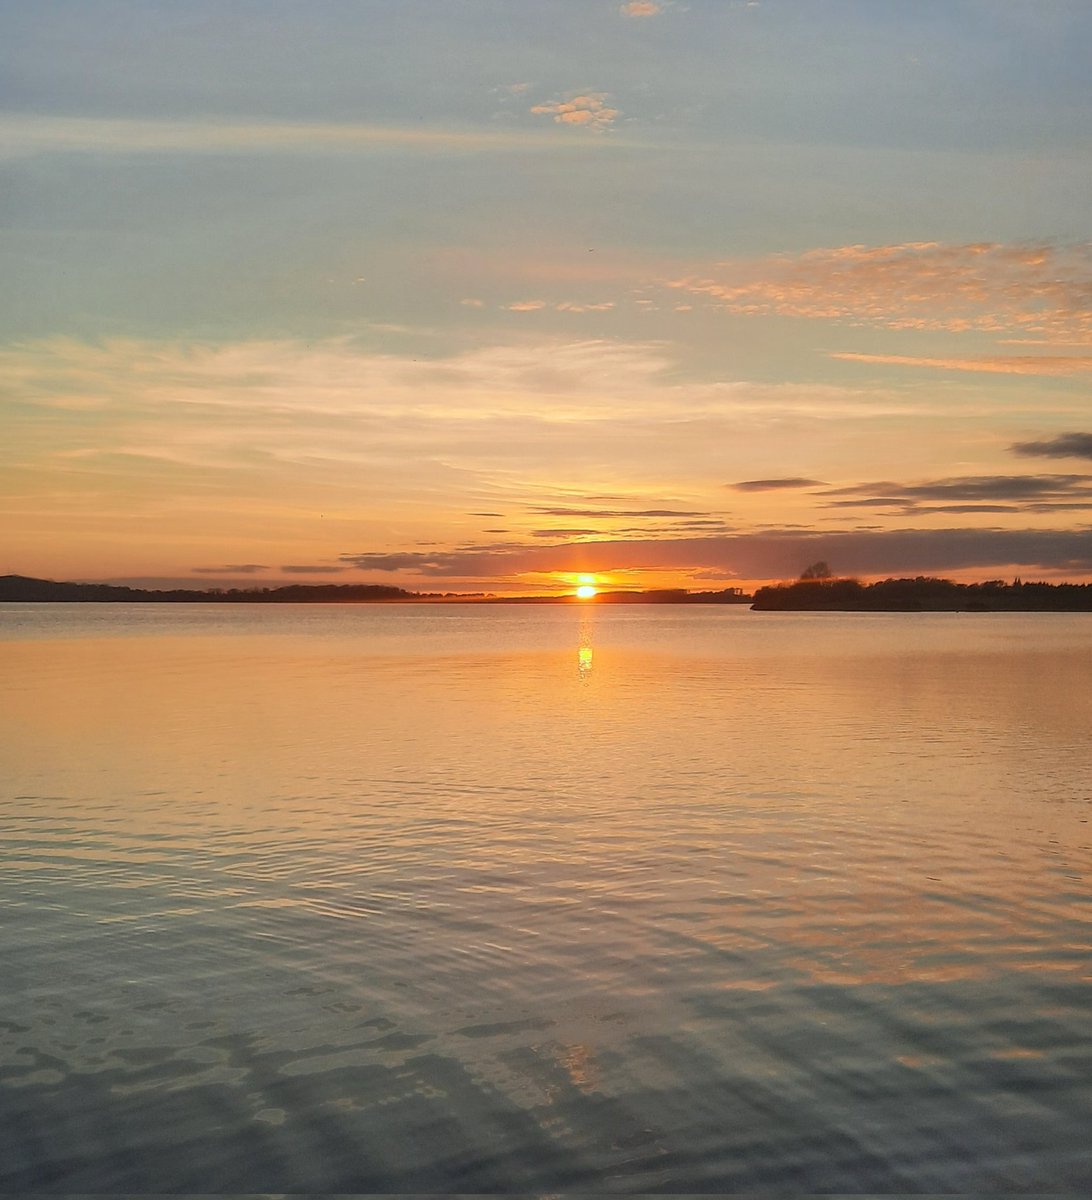 A beautiful sunset this evening at lough Owel, just outside Mullingar